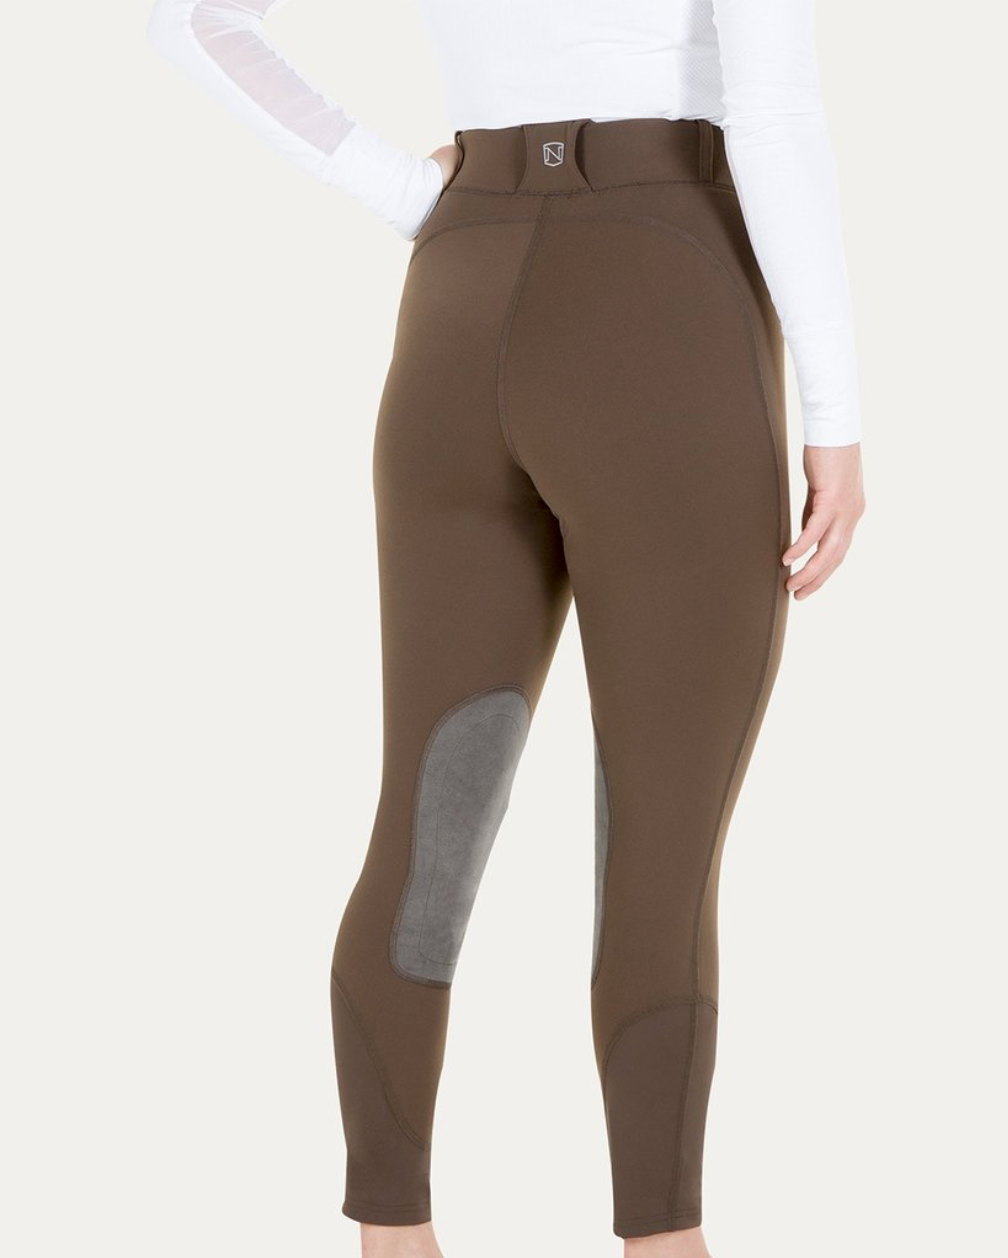 noble outfitters riding tights sale